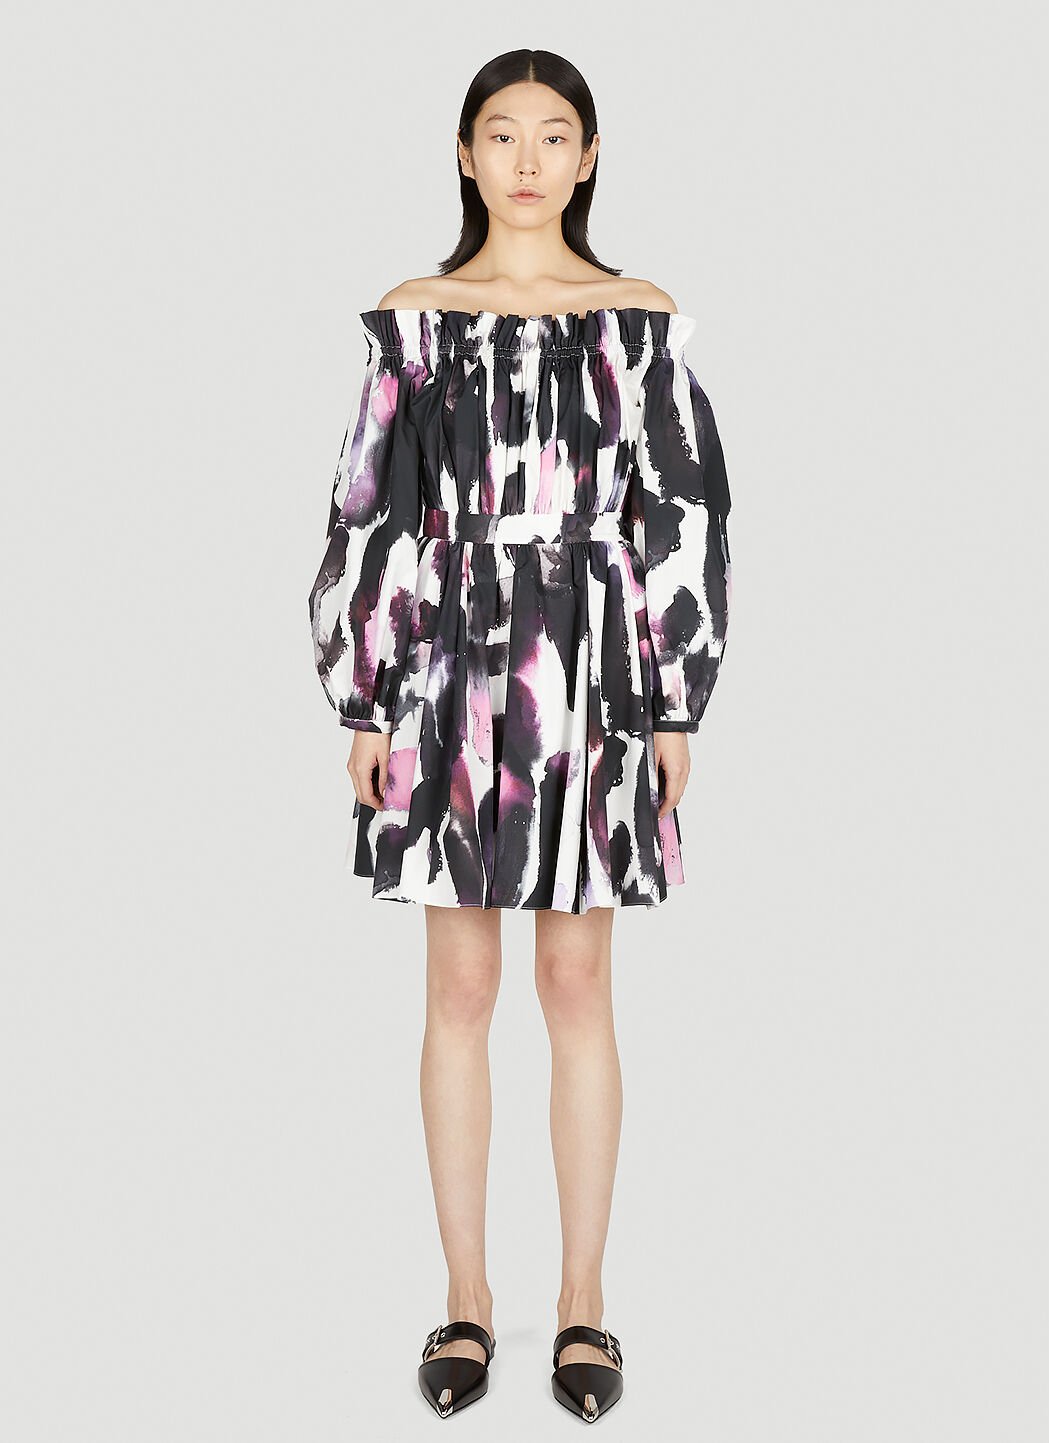 Alexander McQueen Painted Pleated Dress Black amq0252012